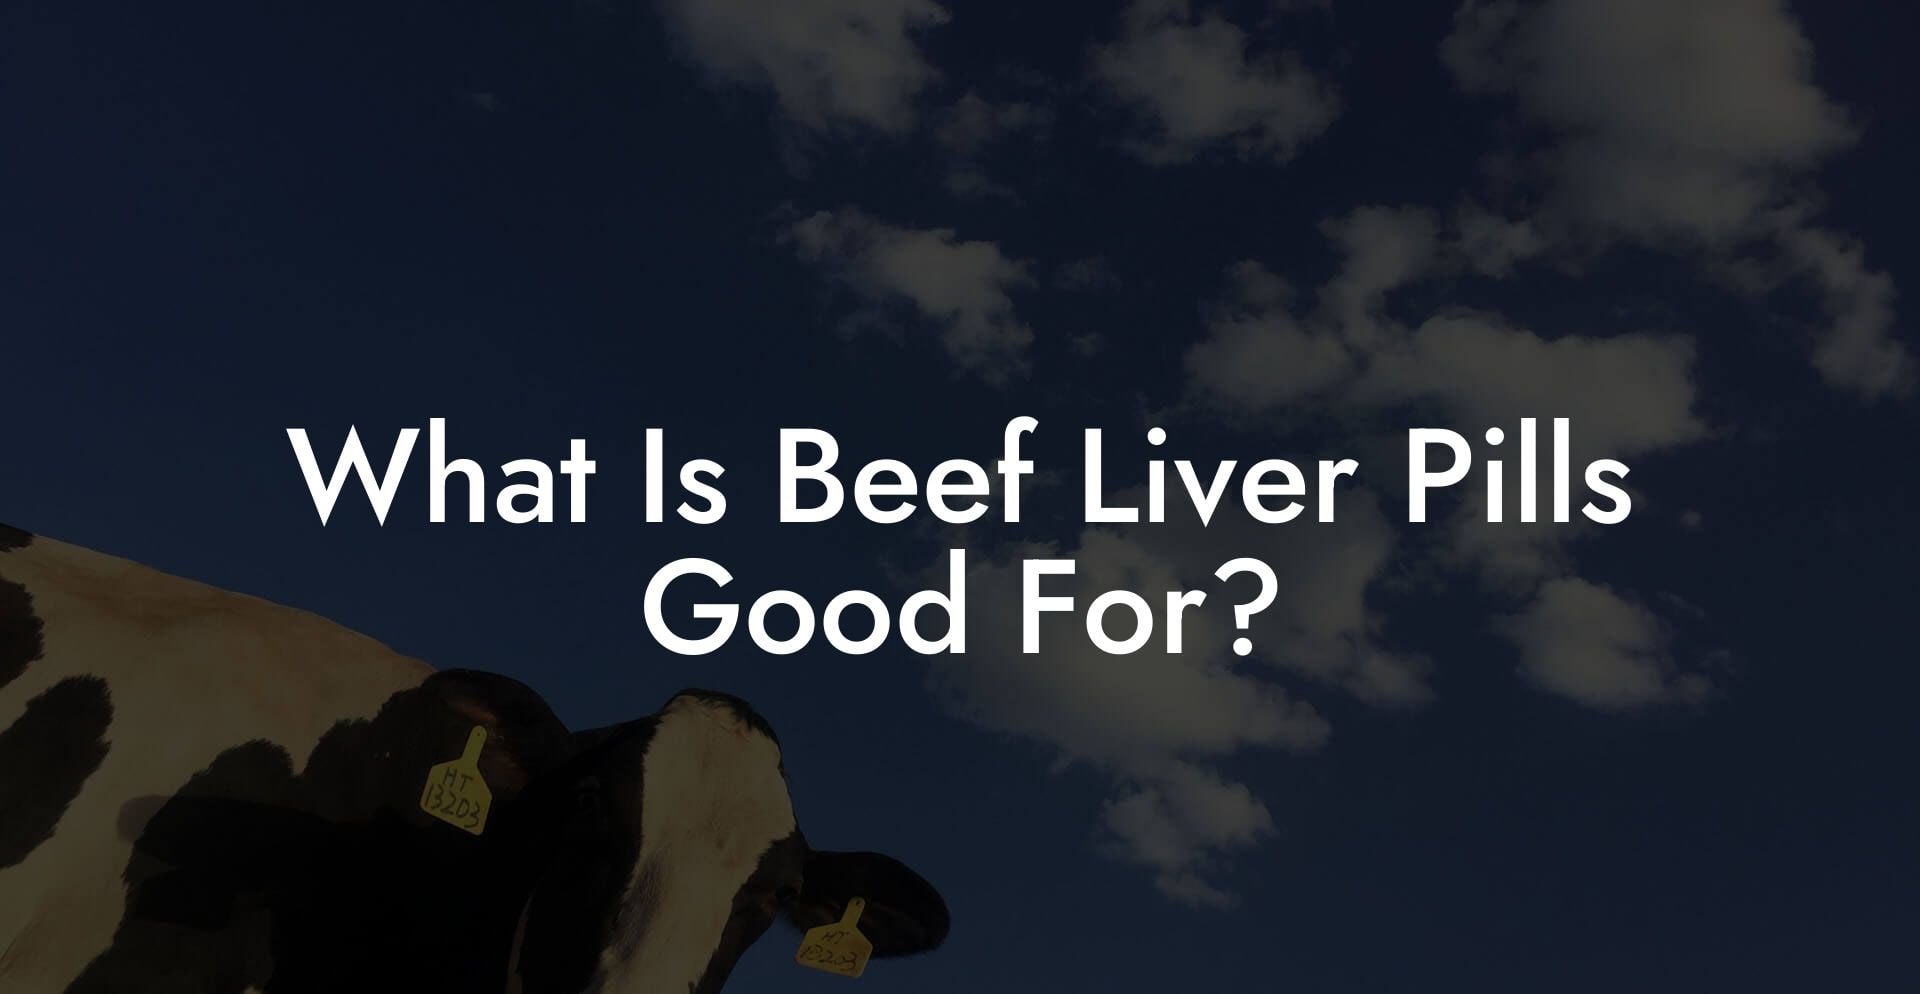 What Is Beef Liver Pills Good For?